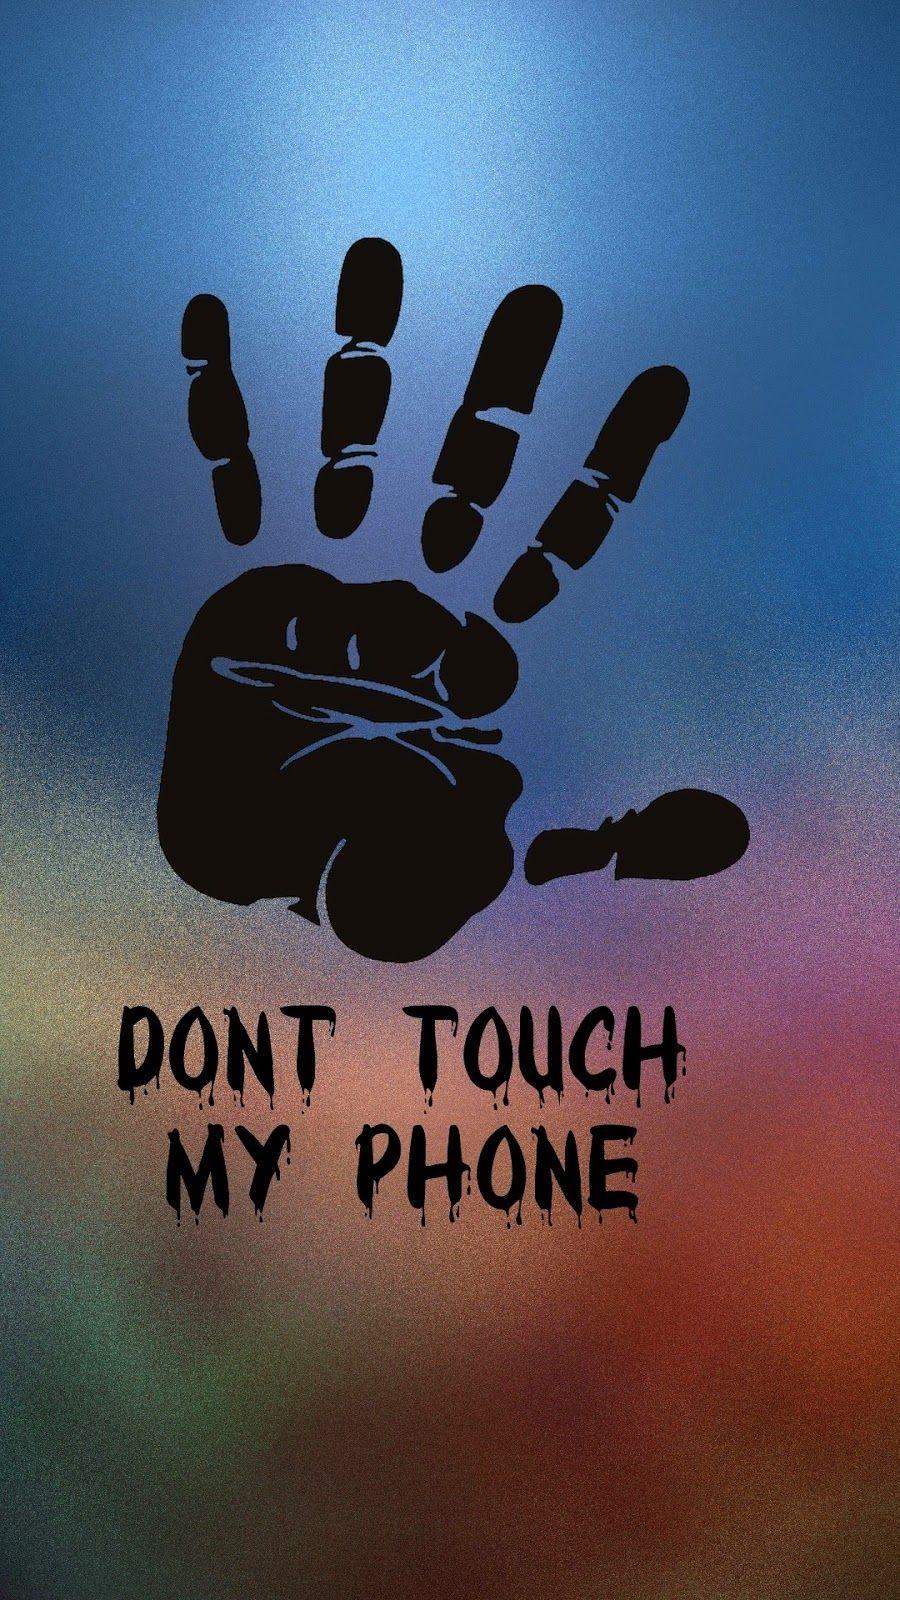 Dont Touch My Phone Full HD Wallpapers - Wallpaper Cave